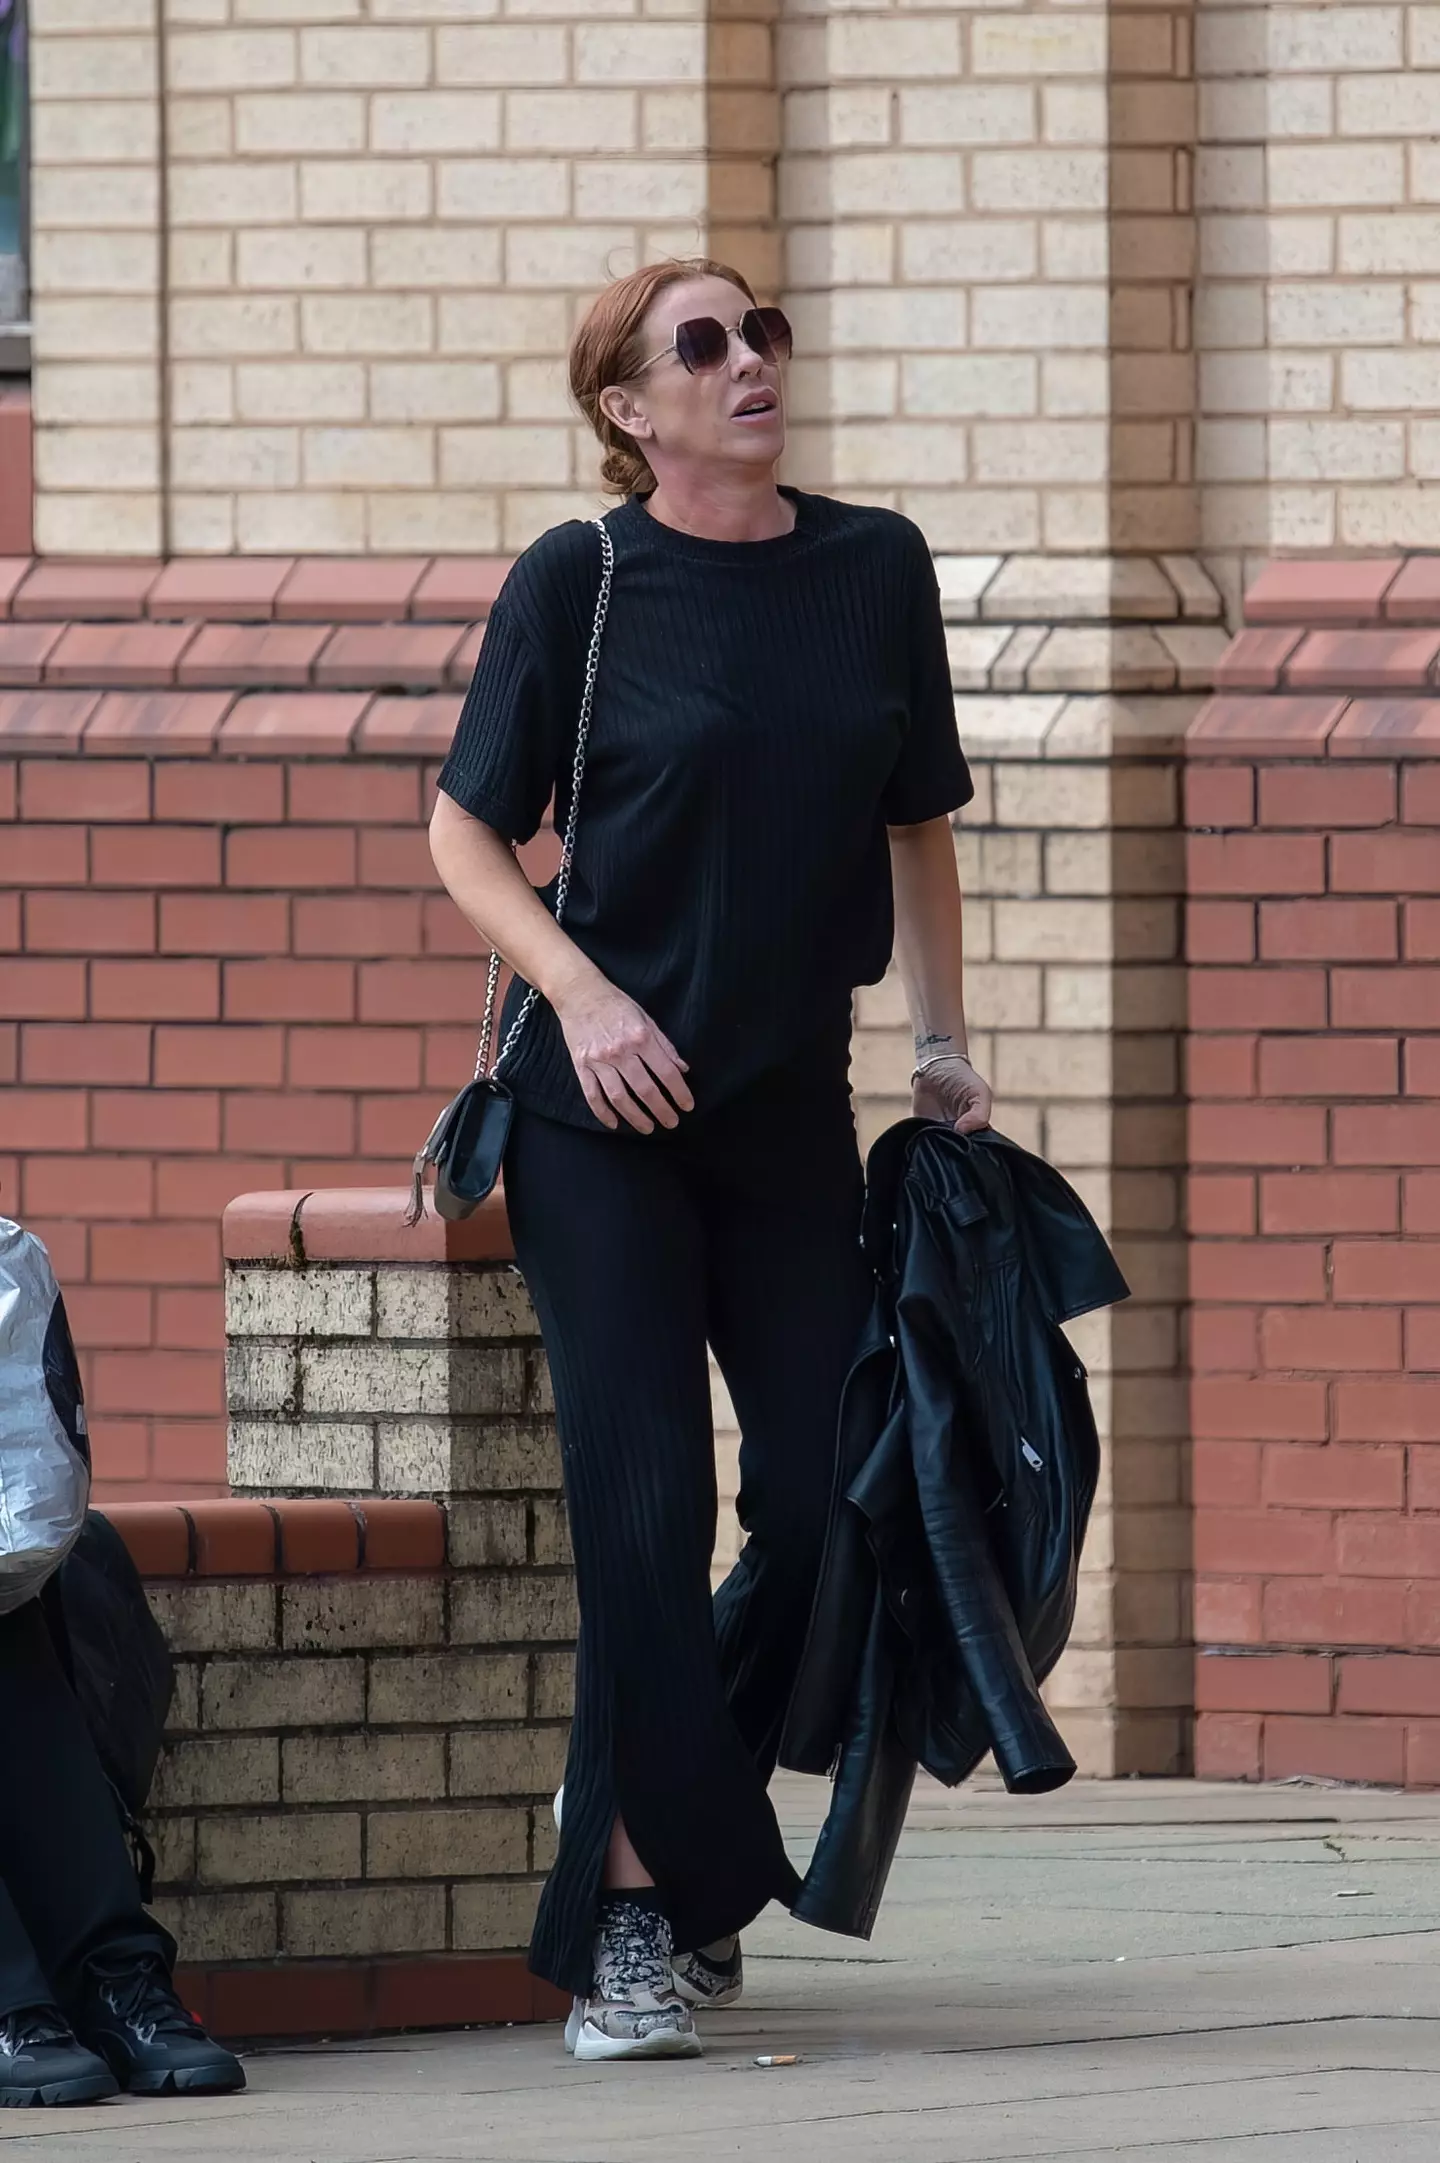 Both mothers were spared jail after being sentenced at Sefton magistrates court.